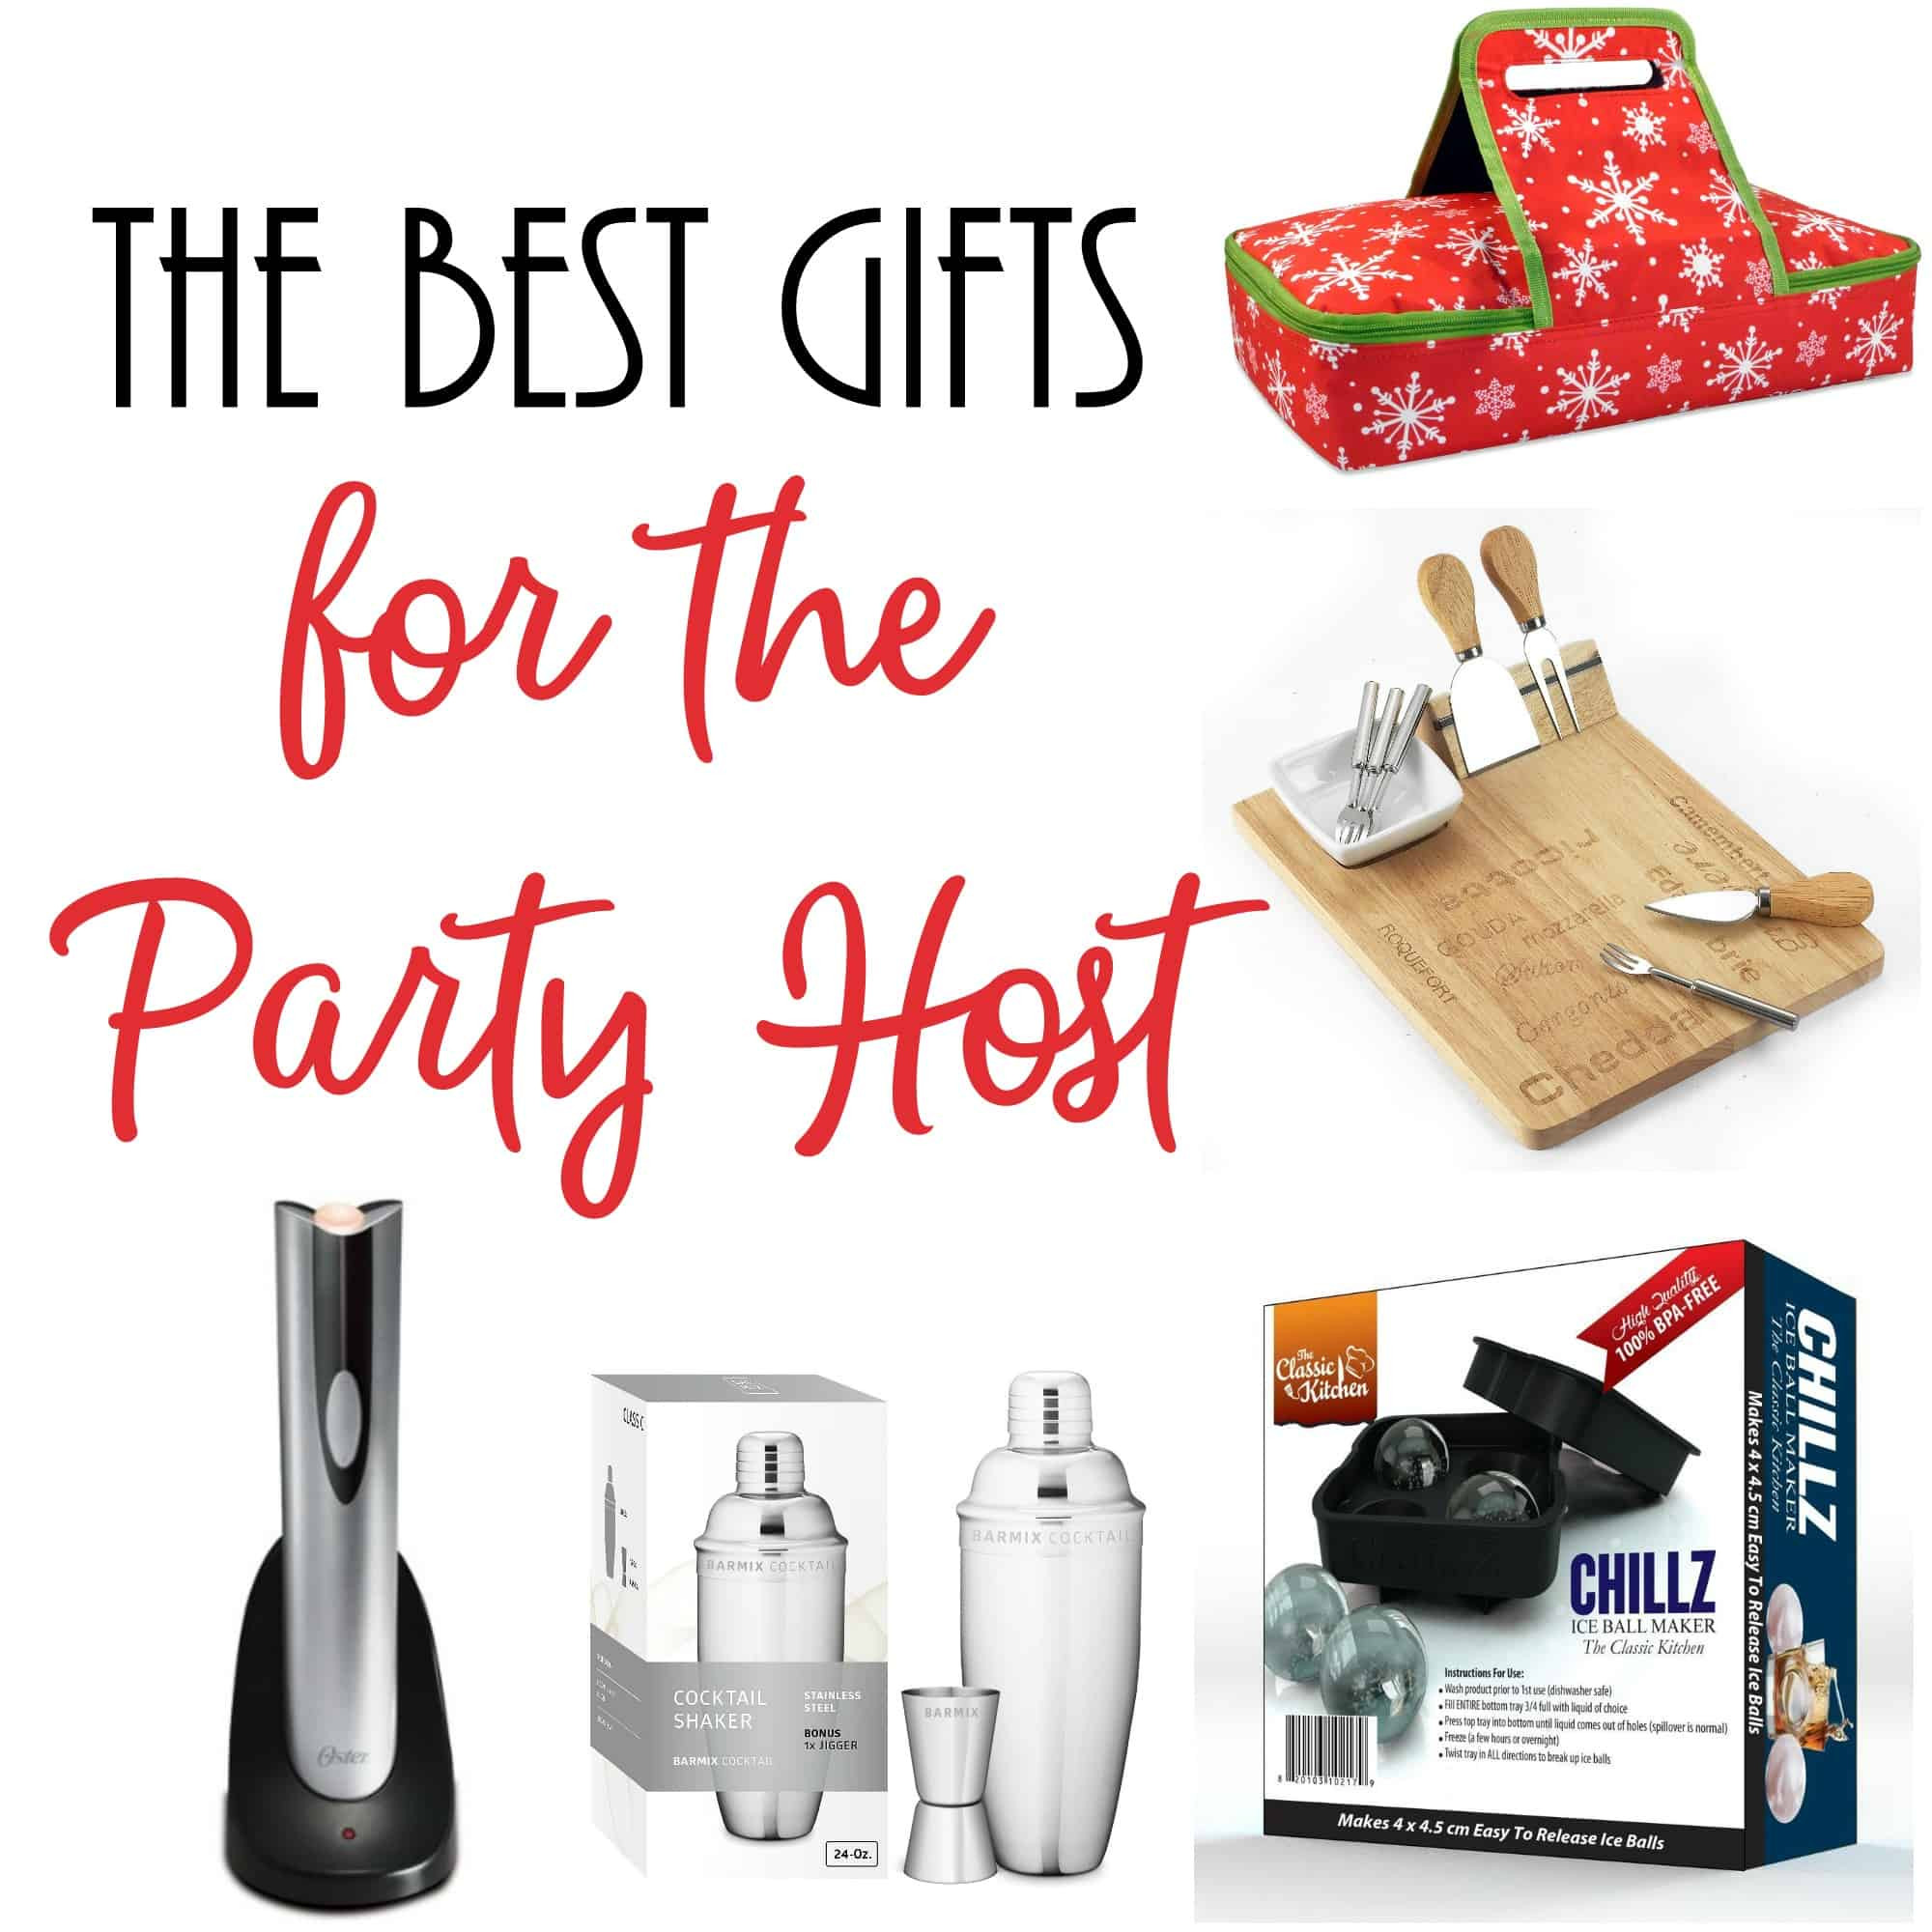 Christmas Party Host Gift Ideas
 The Best Gift Ideas for Holiday Party Hosts Saving